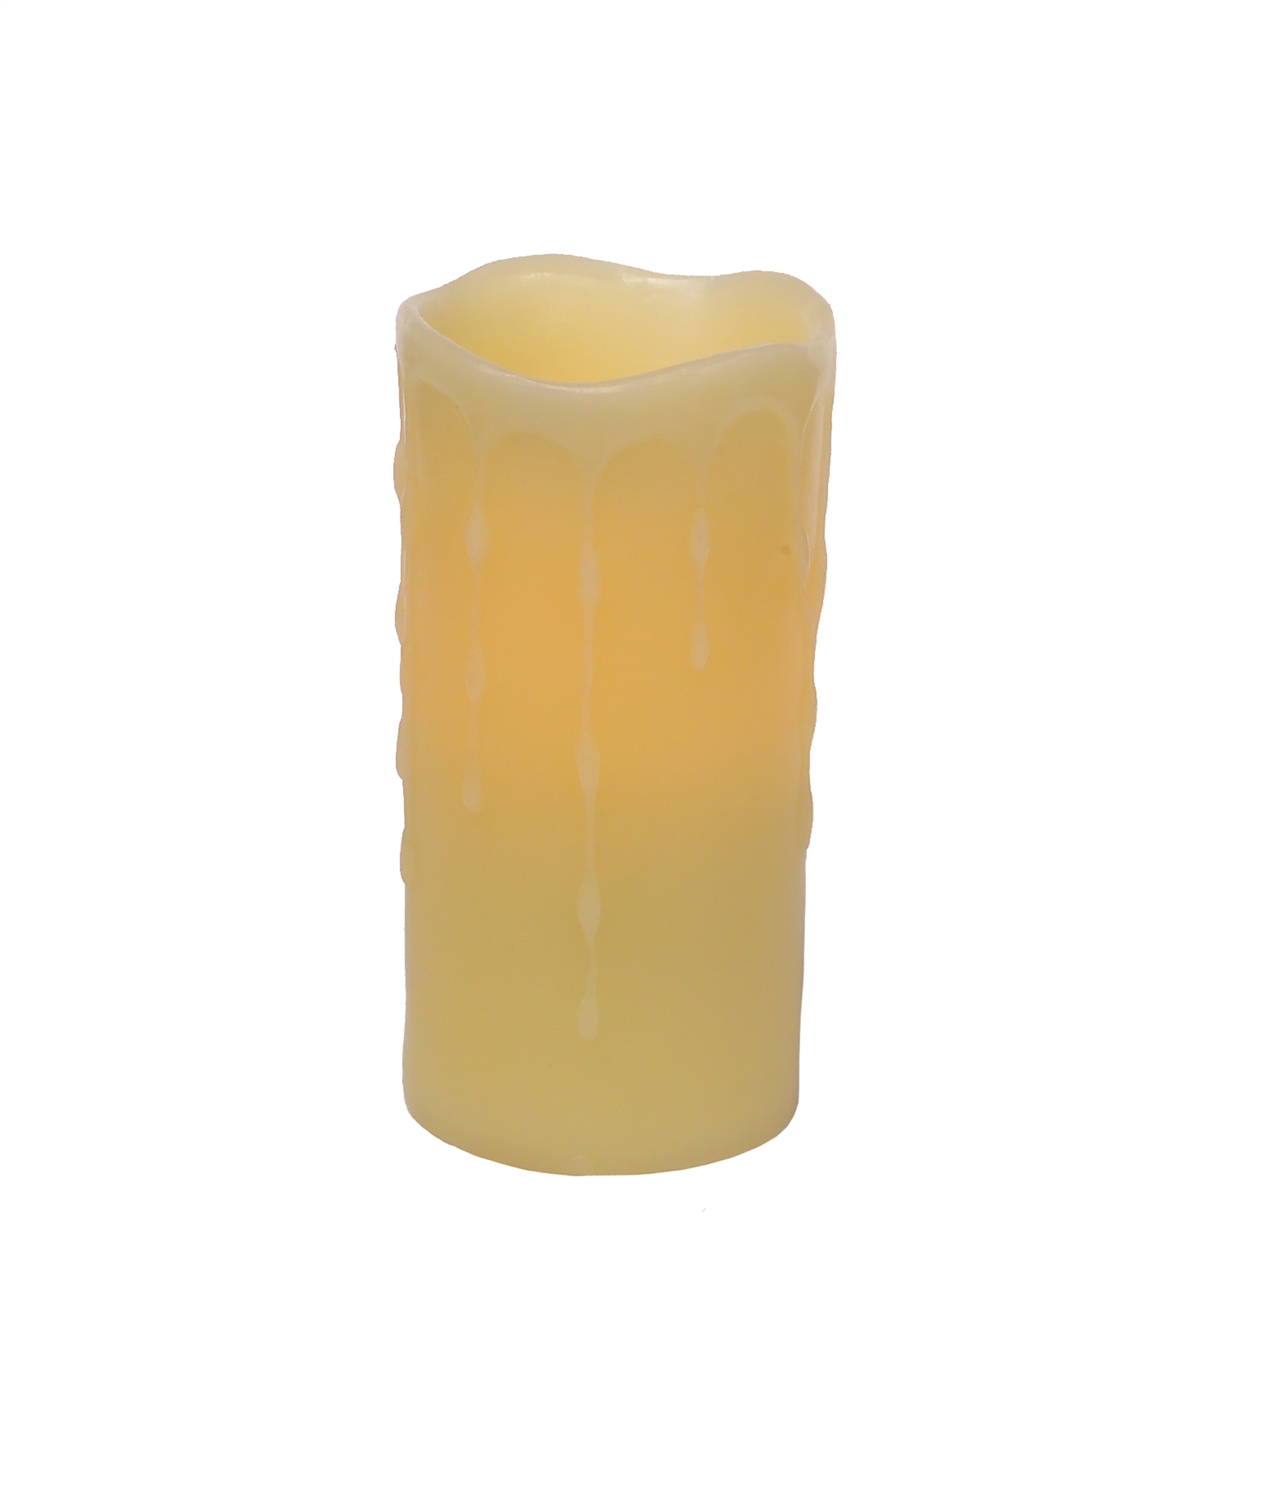 LED Wax Dripping Pillar Candle (Set of 4) 3"Dx6"H Wax/Plastic - 2 C Batteries Not Incld